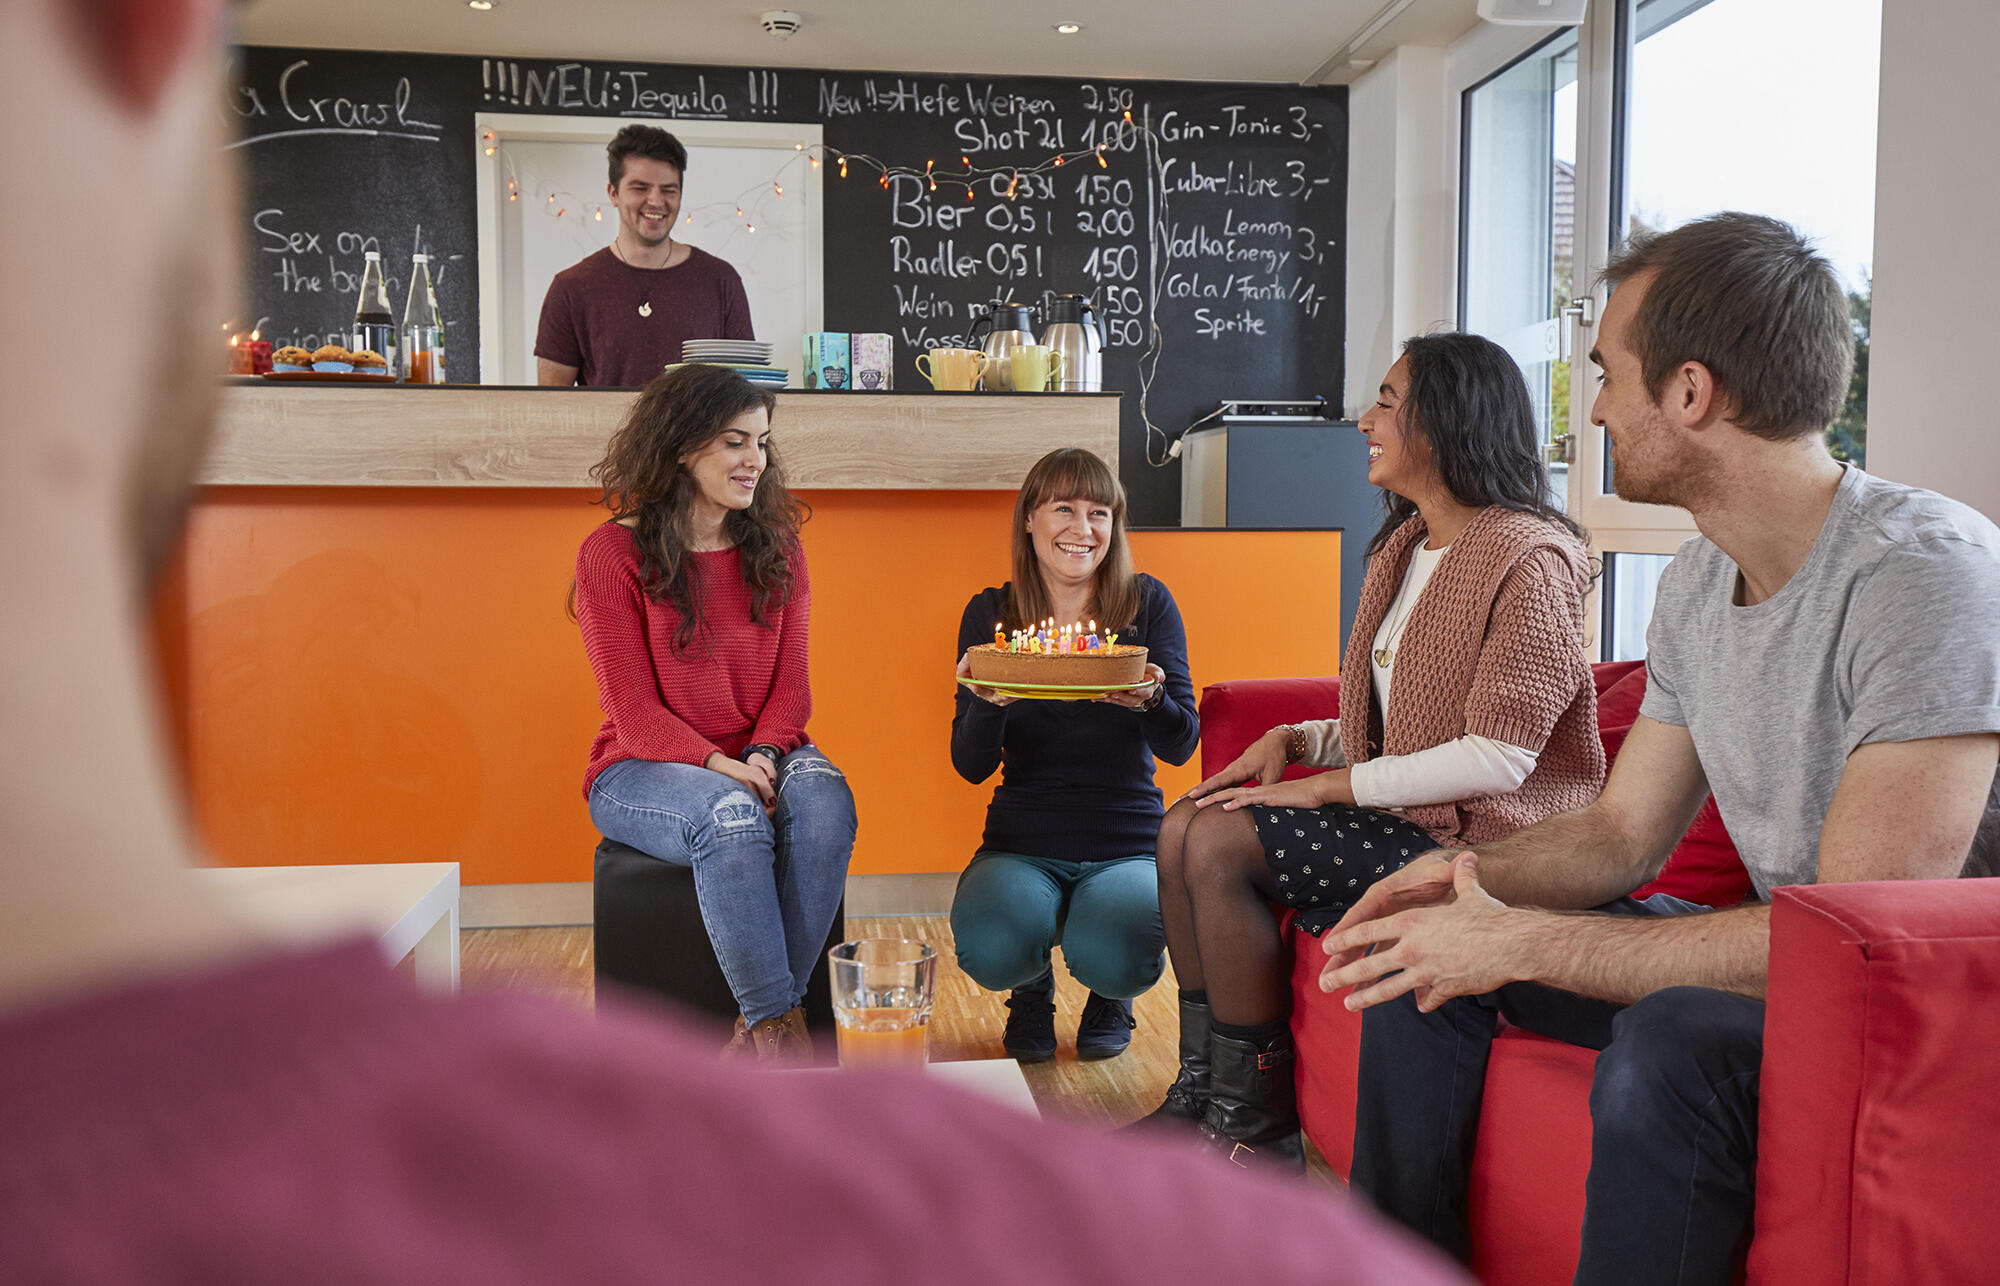 Students celebrate their birthday in the common room of the Birkenwald residential complex 